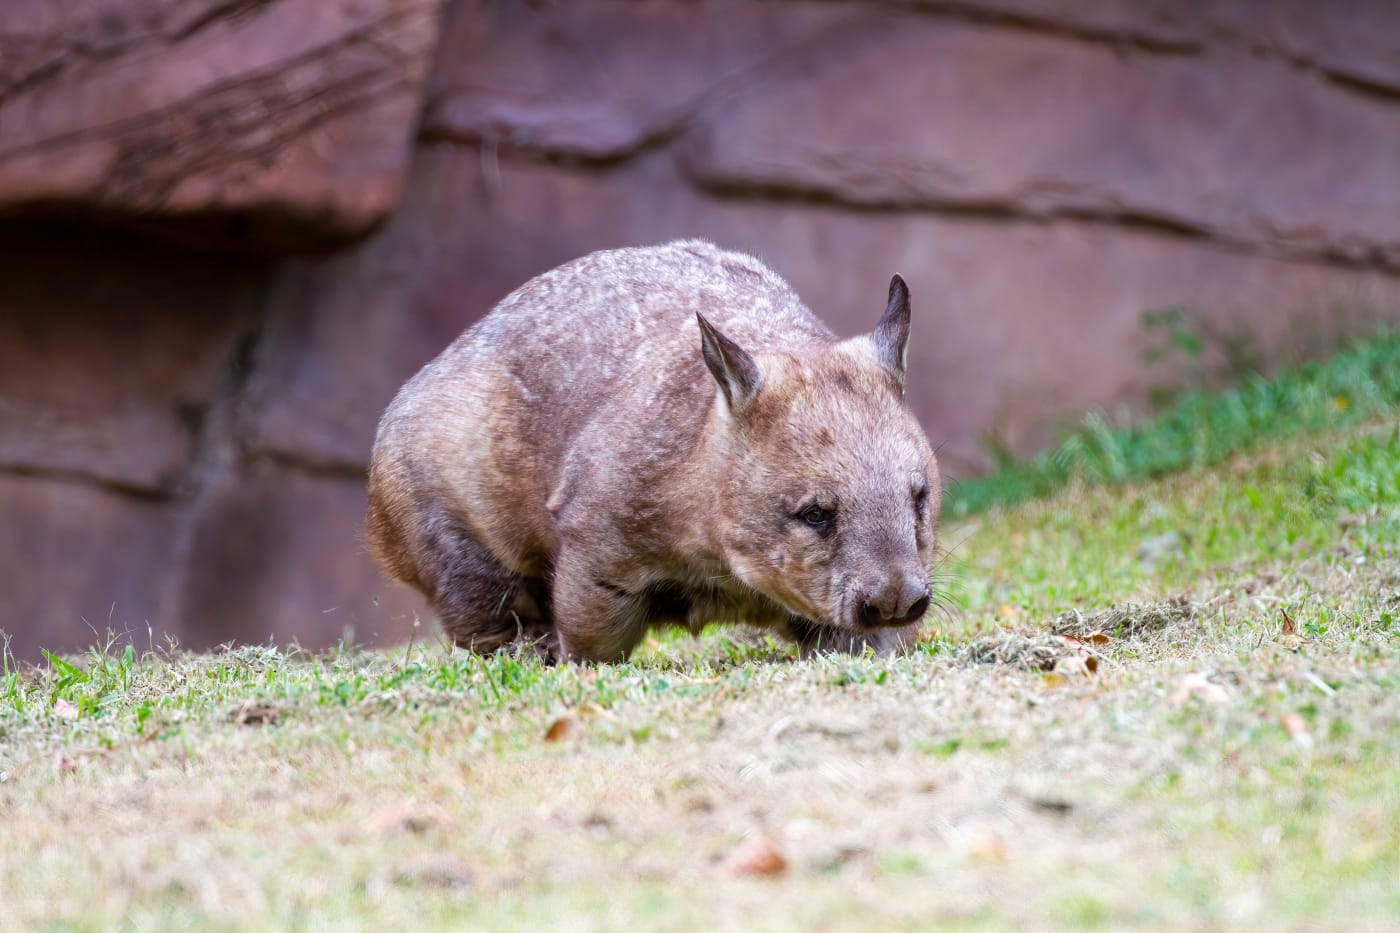 Northern hairy nosed wombat walking on grass.